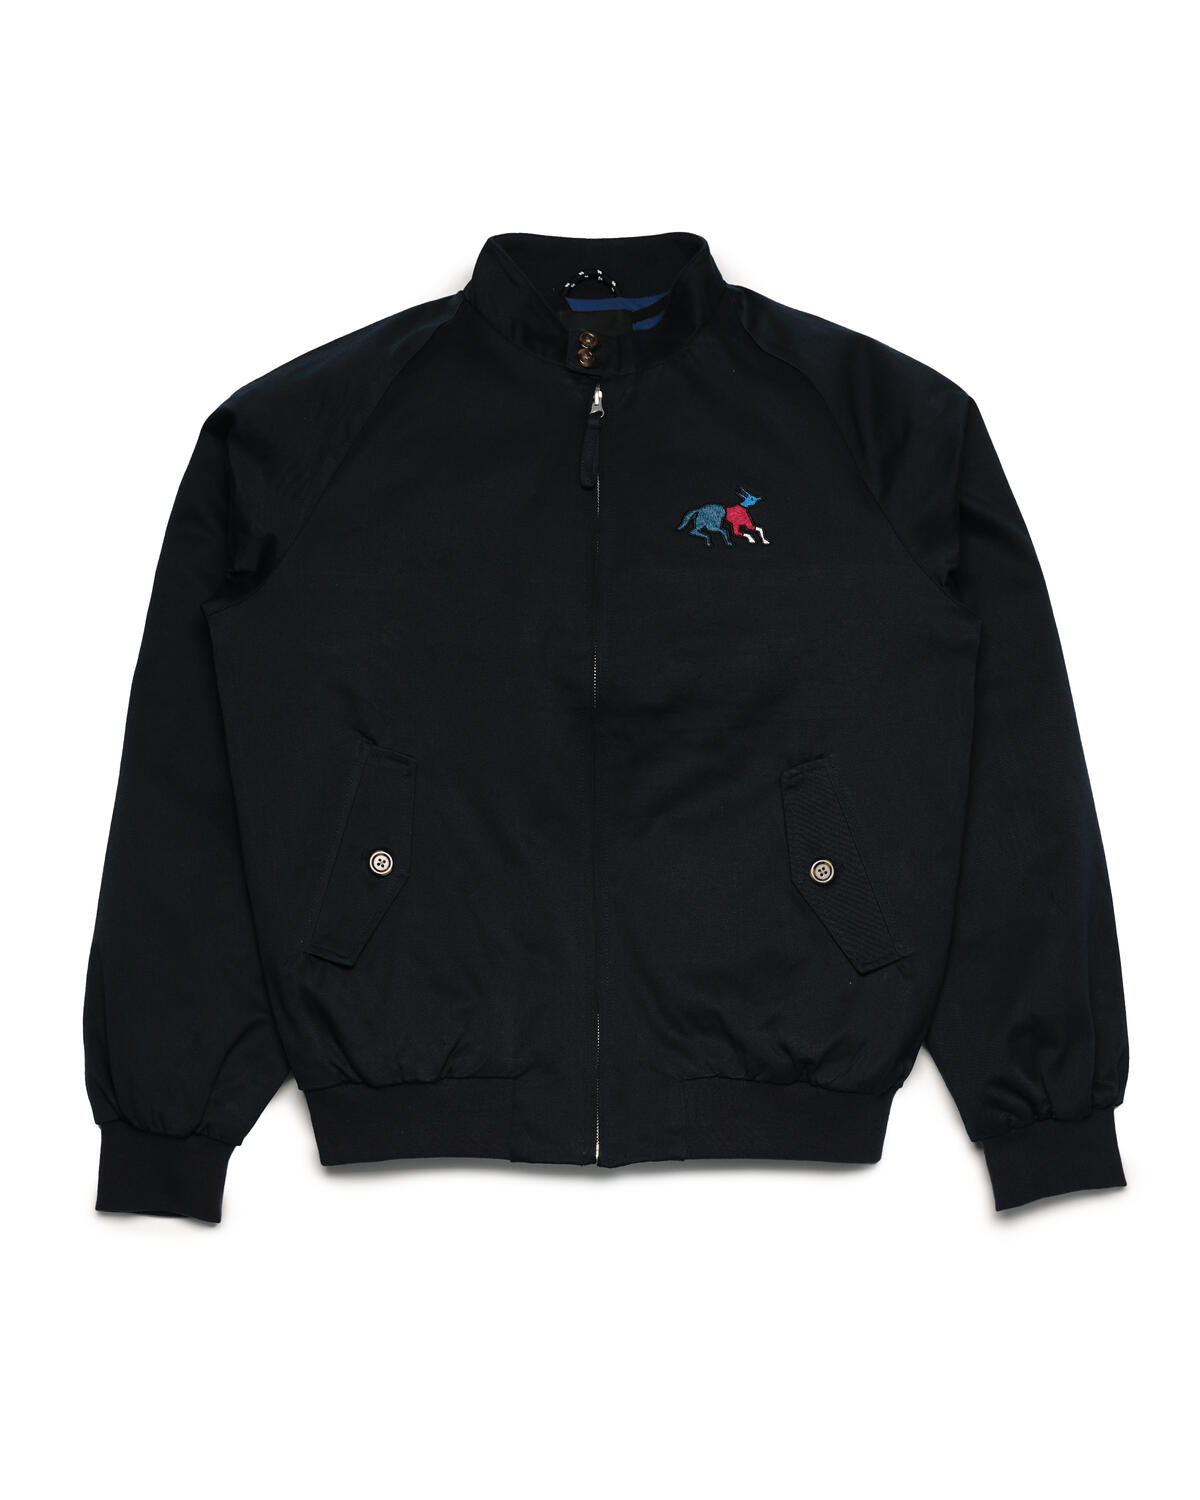 by Parra anxious dog jacket | 49240 | AFEW STORE